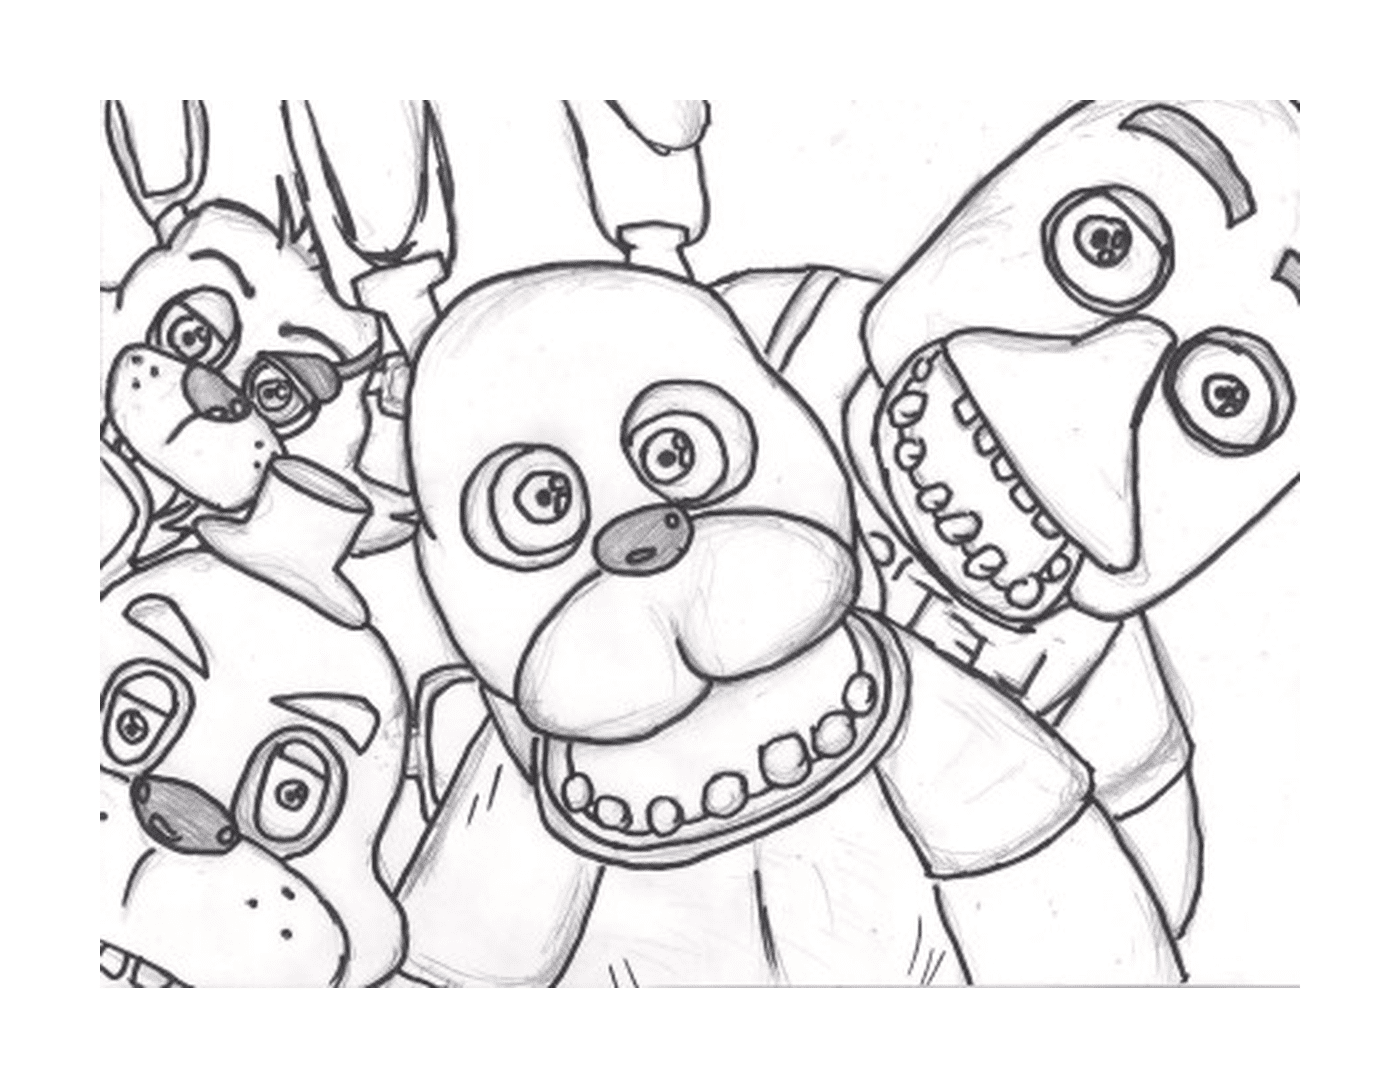  Several characters from Five Nights at Freddy's 